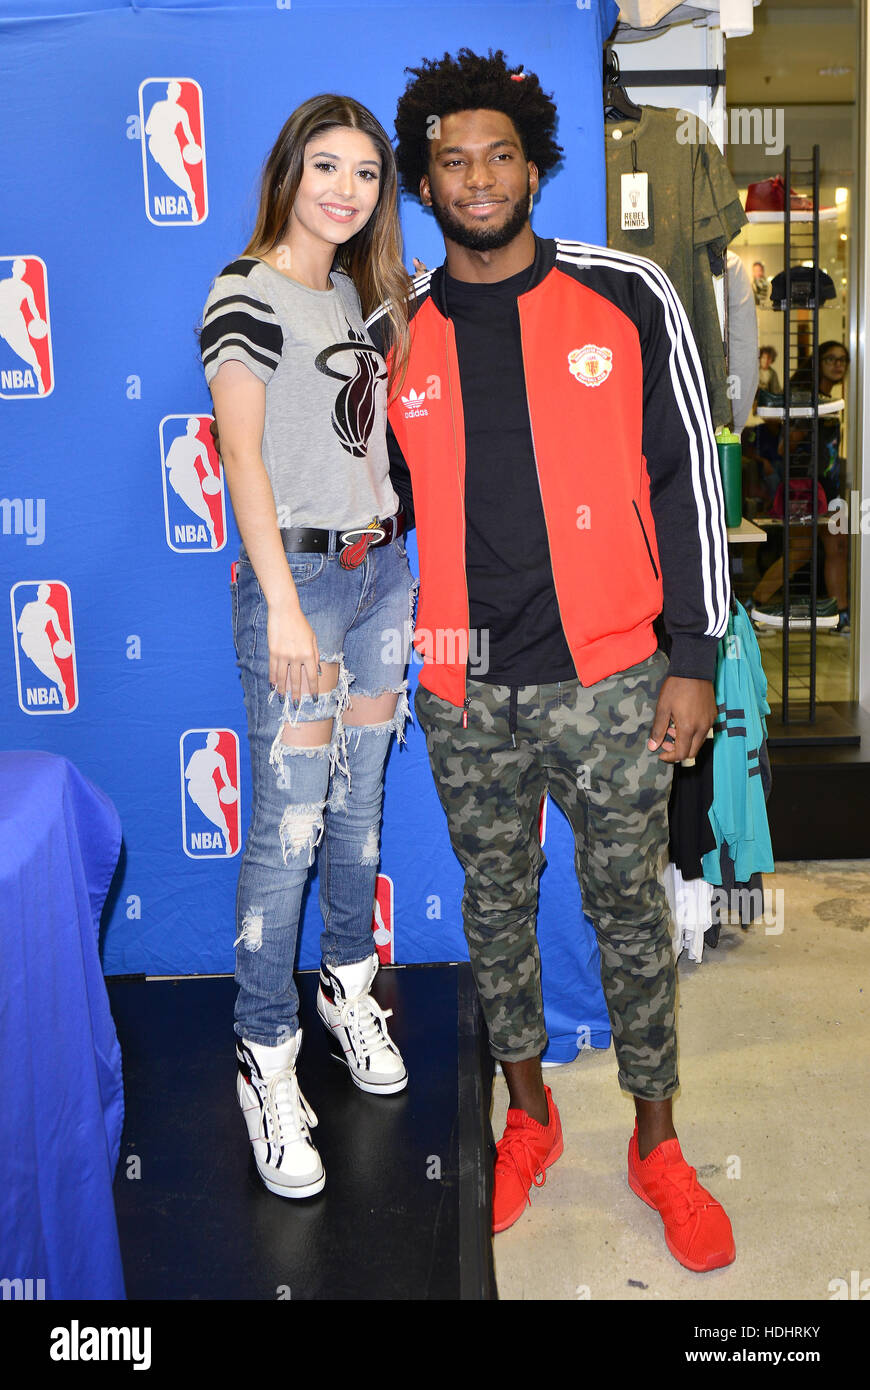 Justise Winslow and Liz Elias attend a meet greet and autograph signing at rue21 in Miami International Mall Featuring: Liz Elias, Justise Winslow Where: Miami, Florida, United States When: Oct